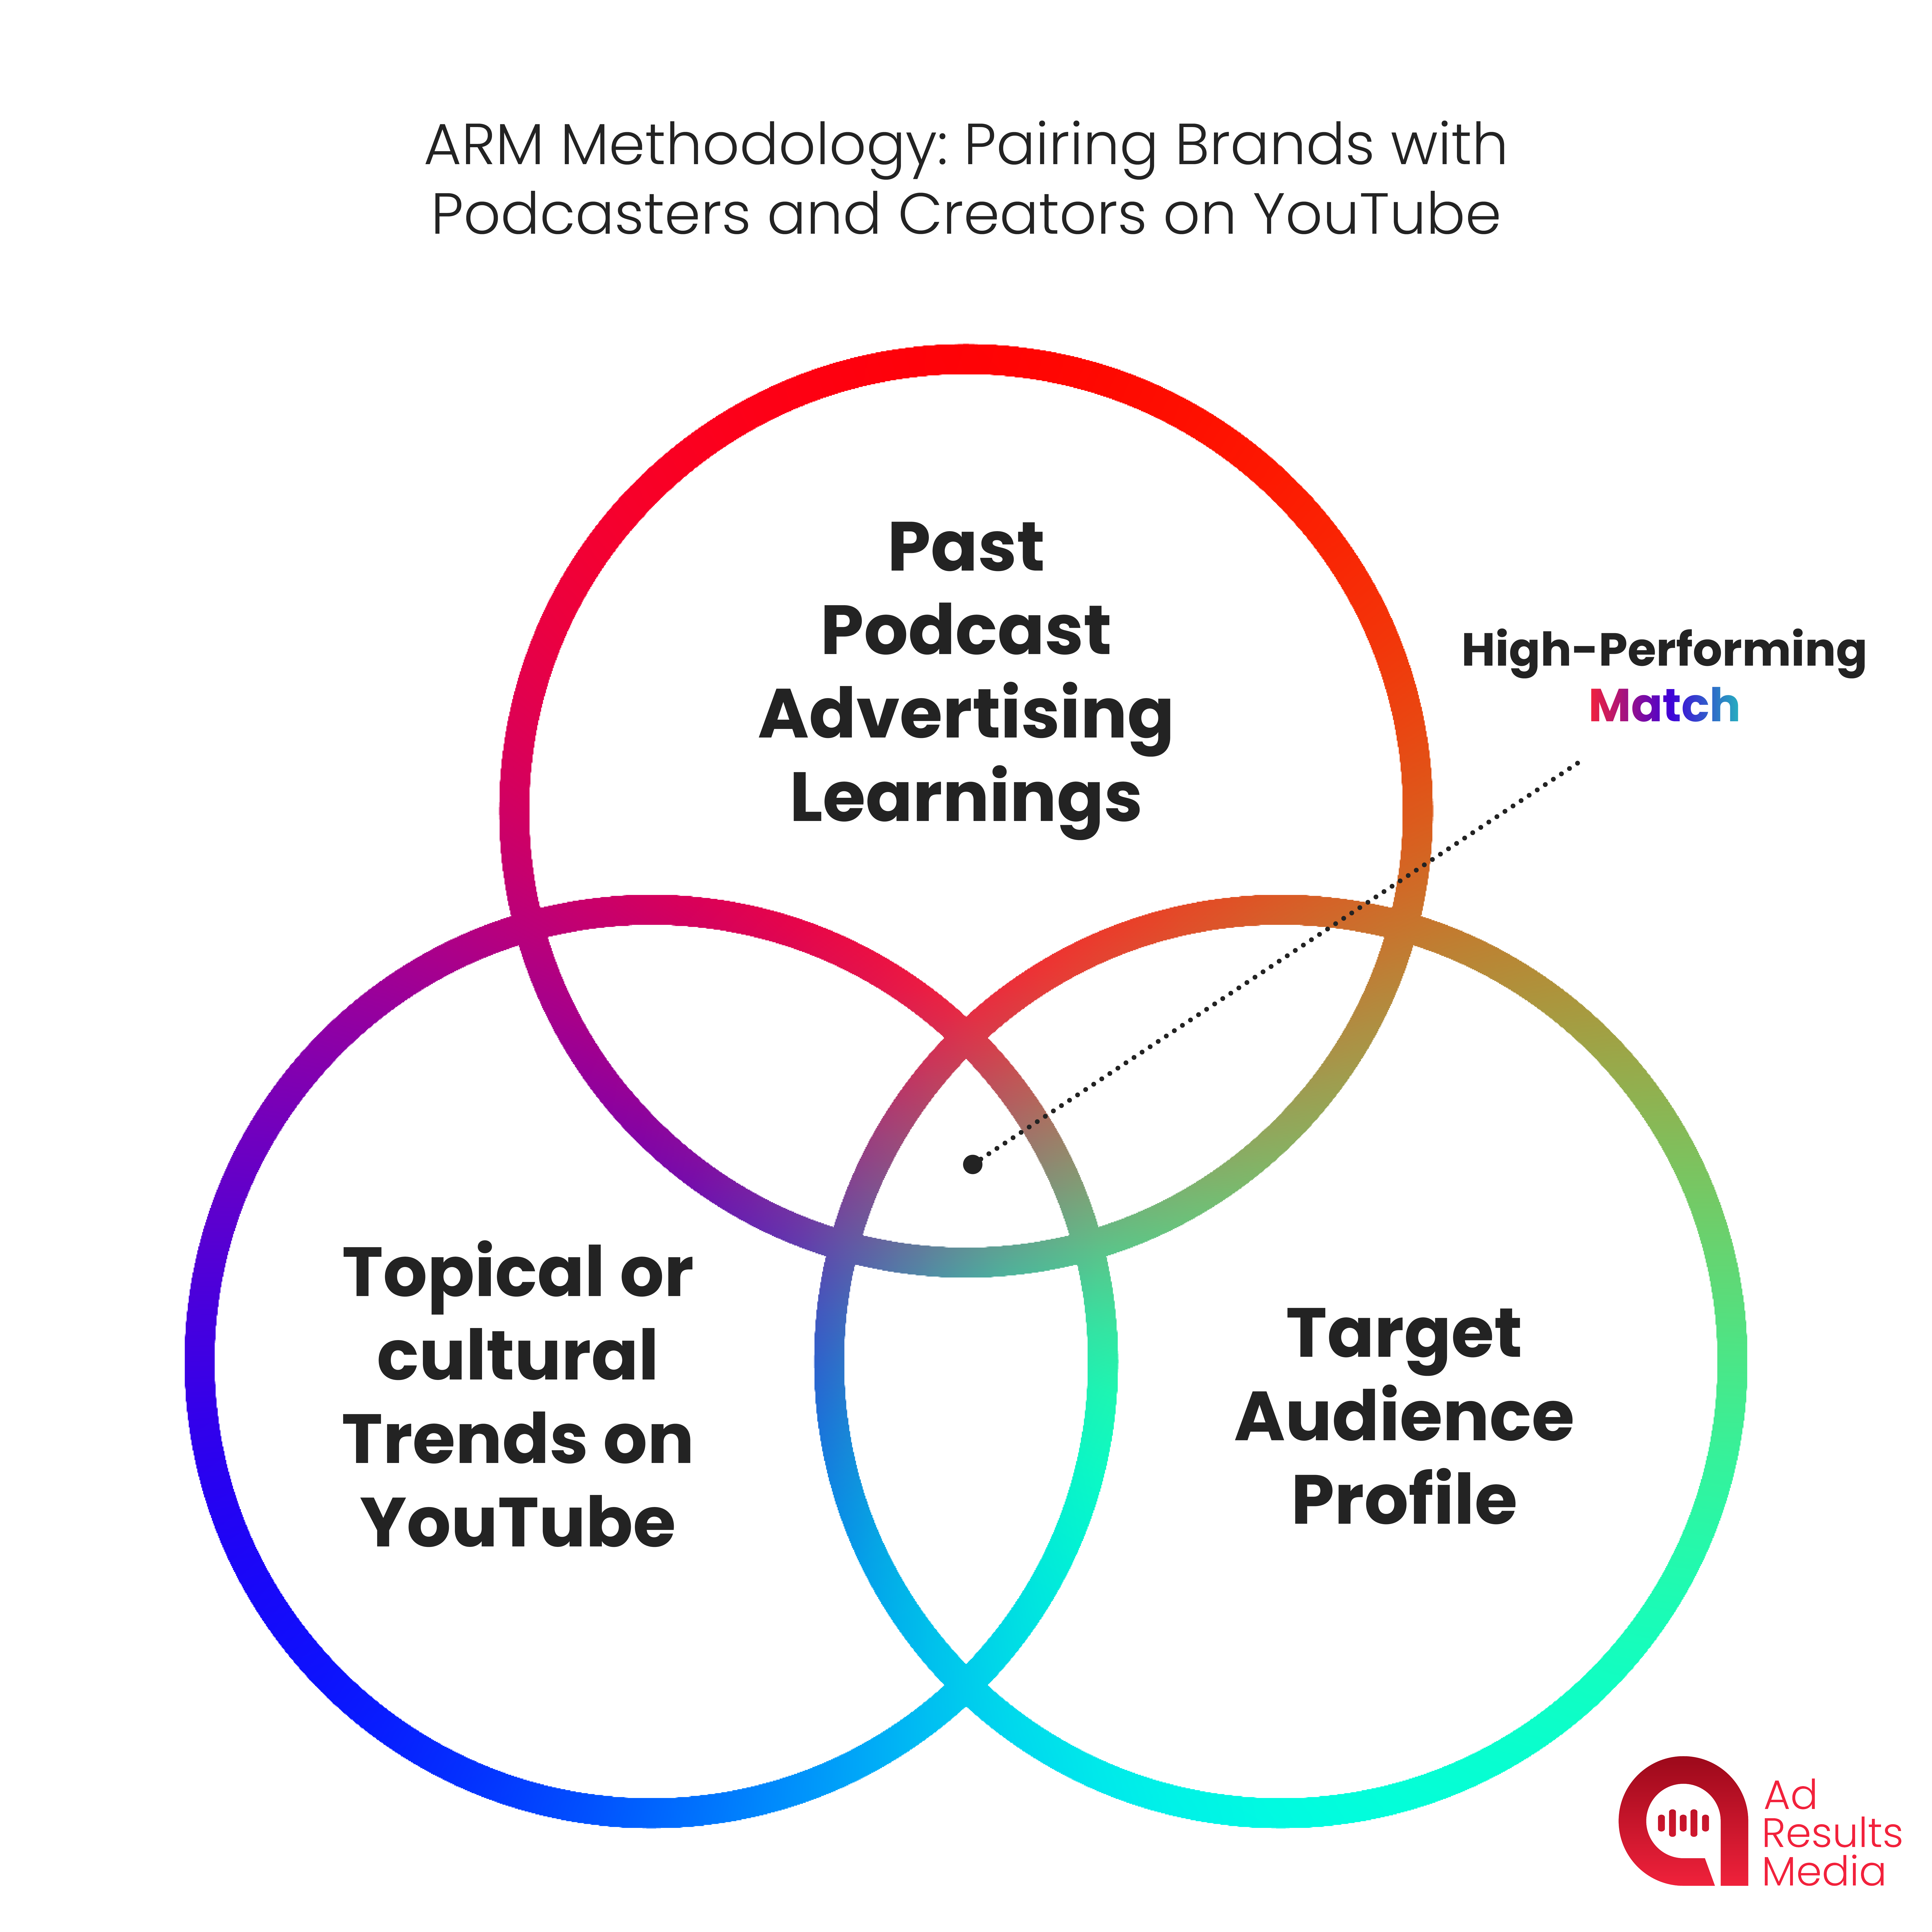 ARM Methodology_Pairing Brands with Podcasters and Creators on YouTube_venn diagram_bg